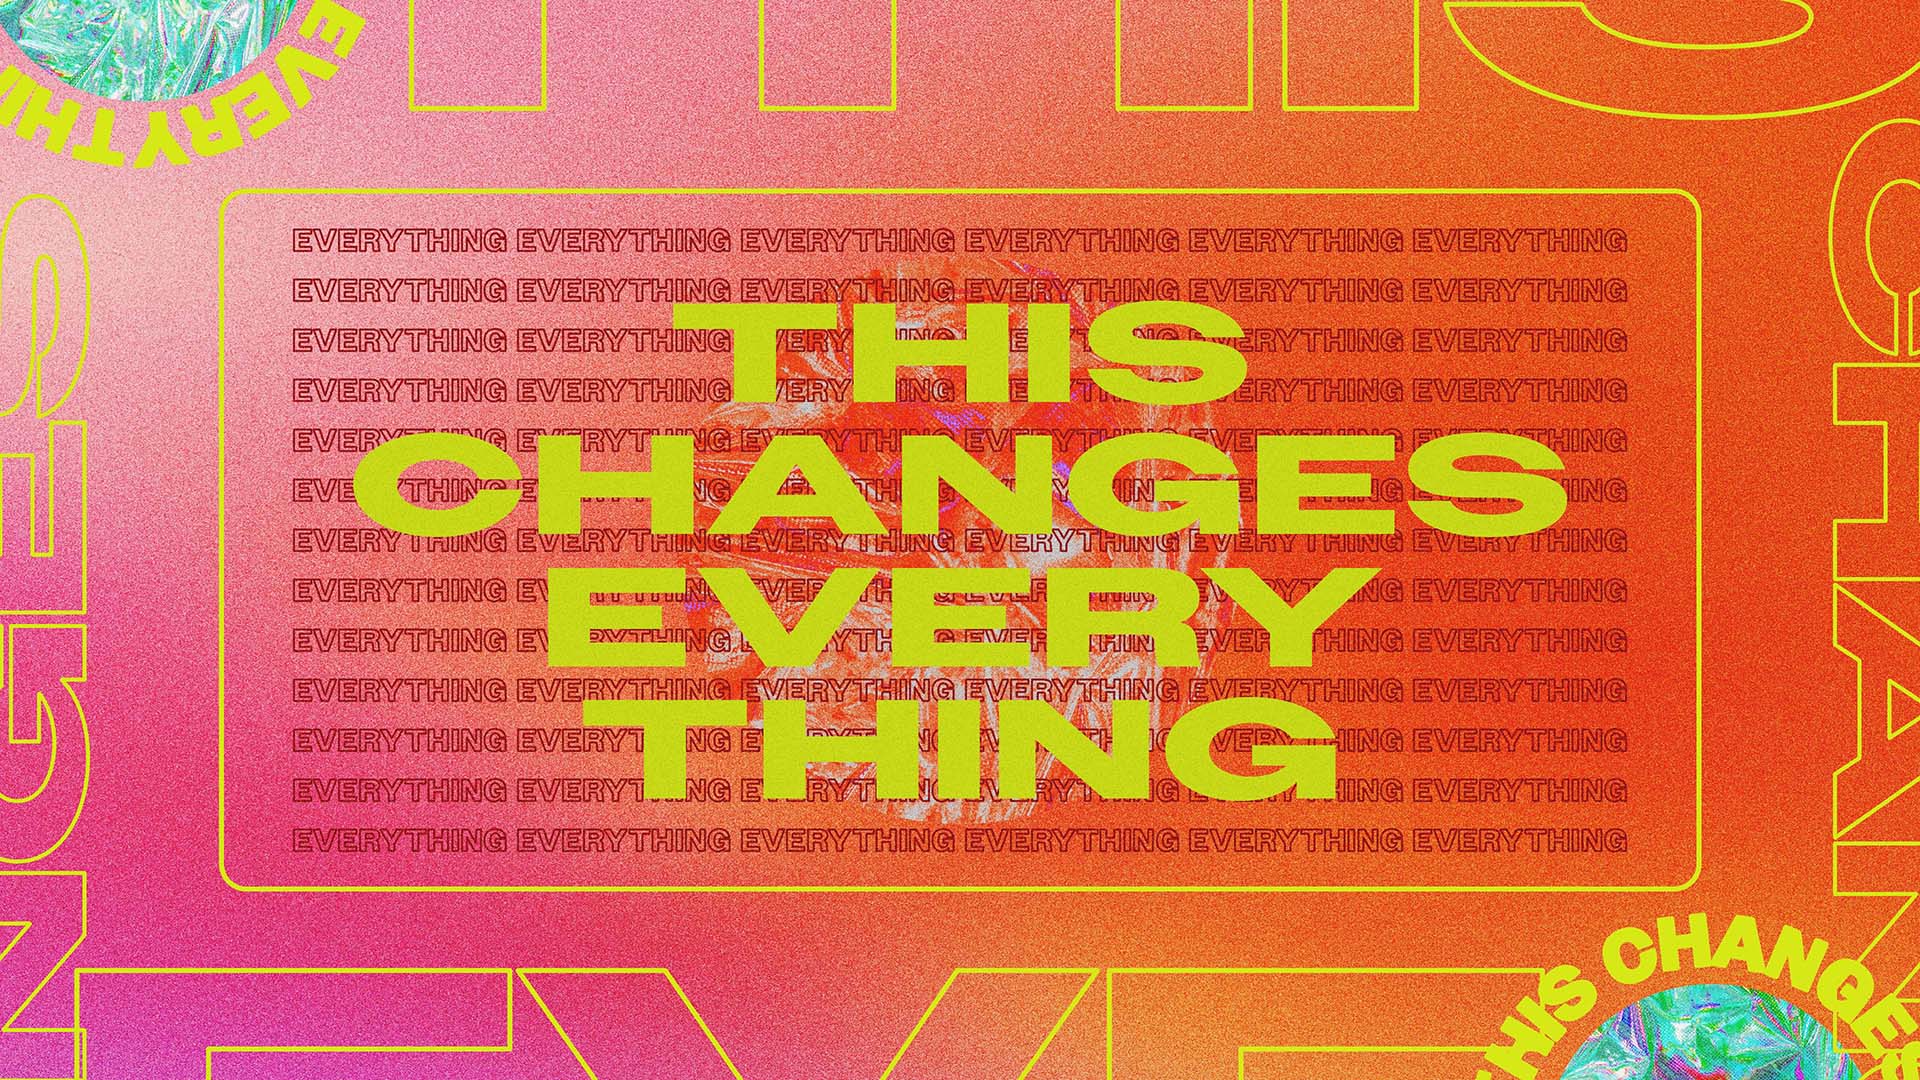 Series: This Changes Everything